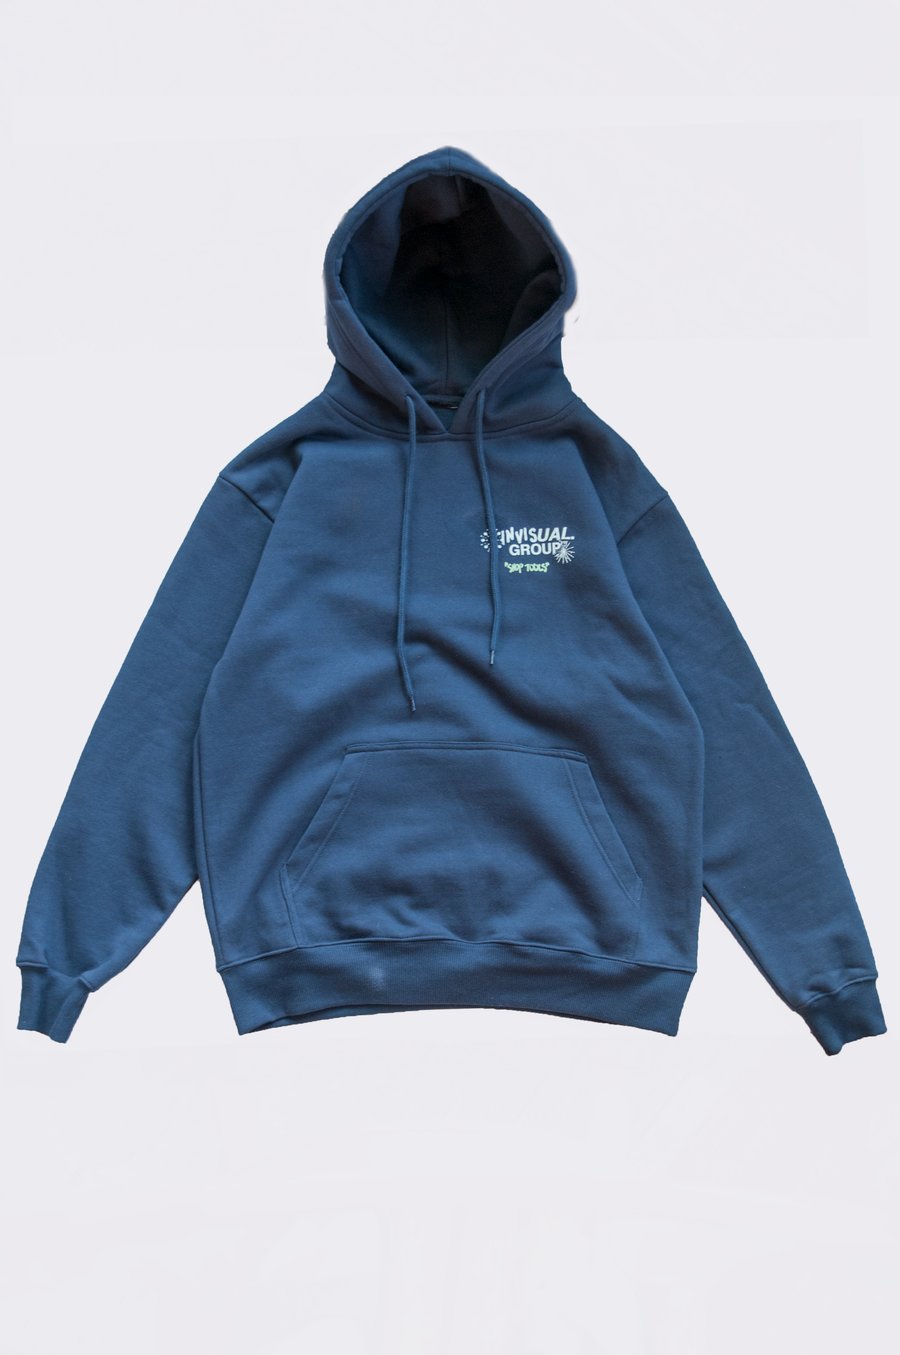 Image of "SHOP TOOLS X_RAY" Hoodie